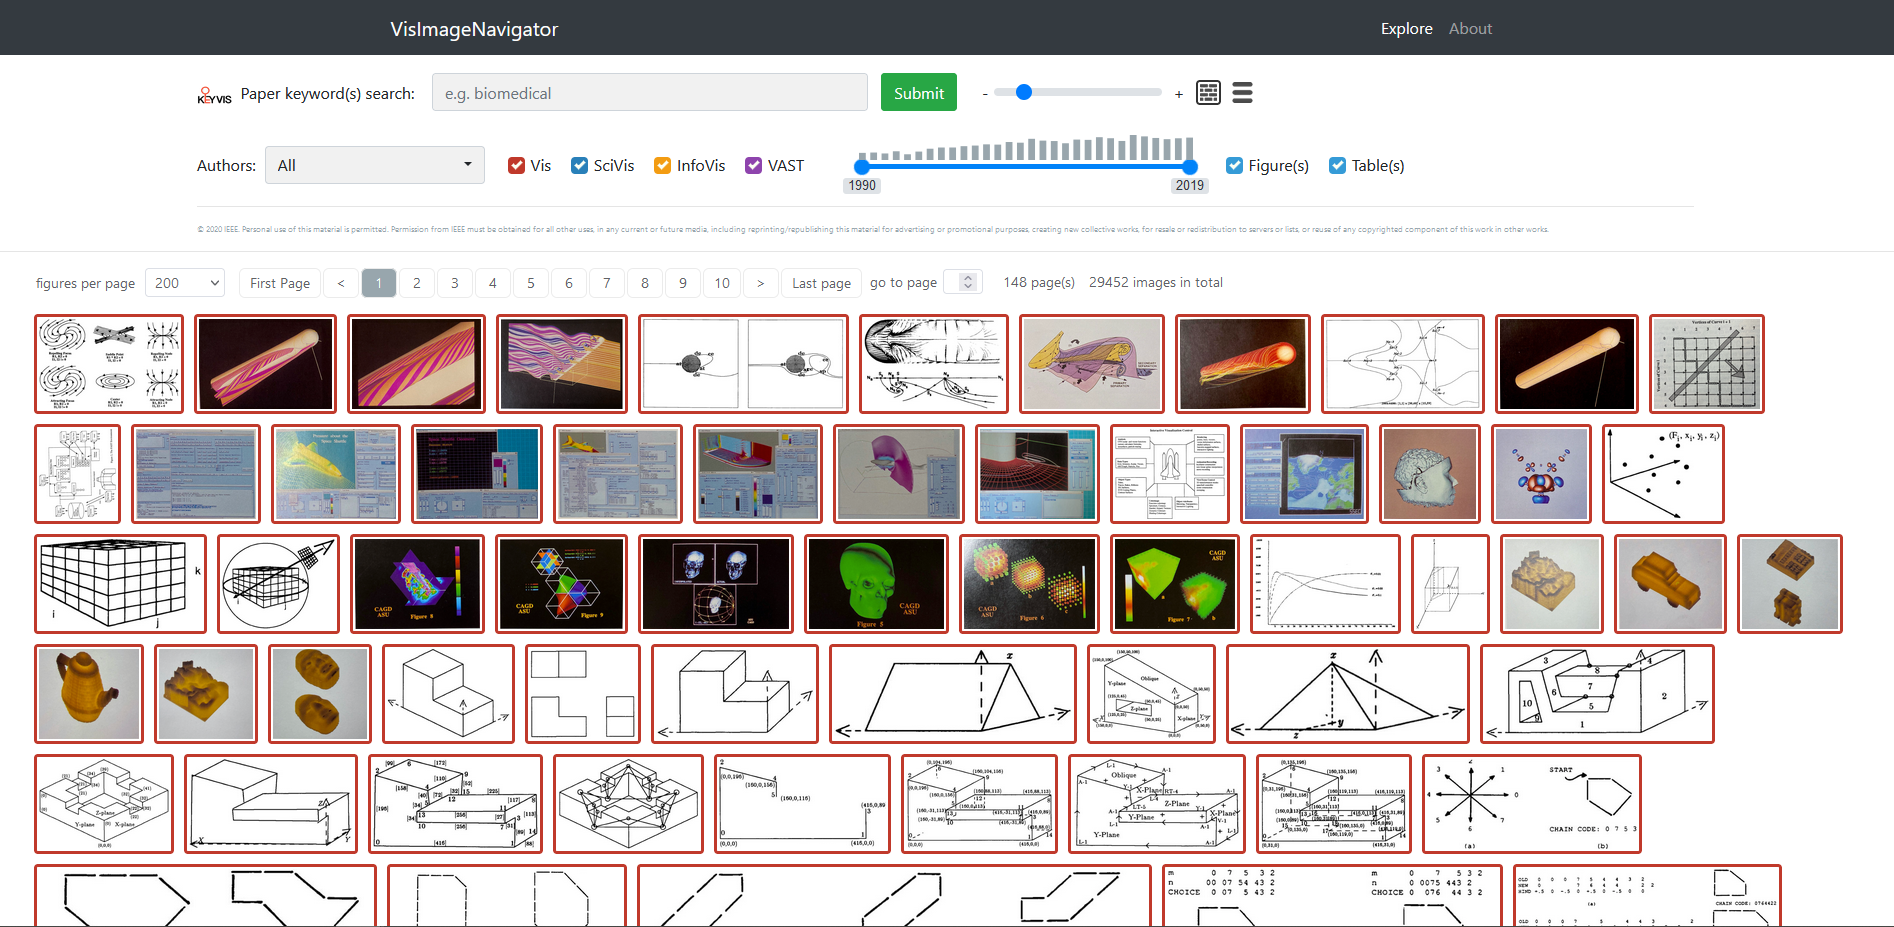 An image of the VisImageNavigator interface showing images collected from IEEE VIS papers in a grid format with several sliders and checkboxes to filter by time and conference.